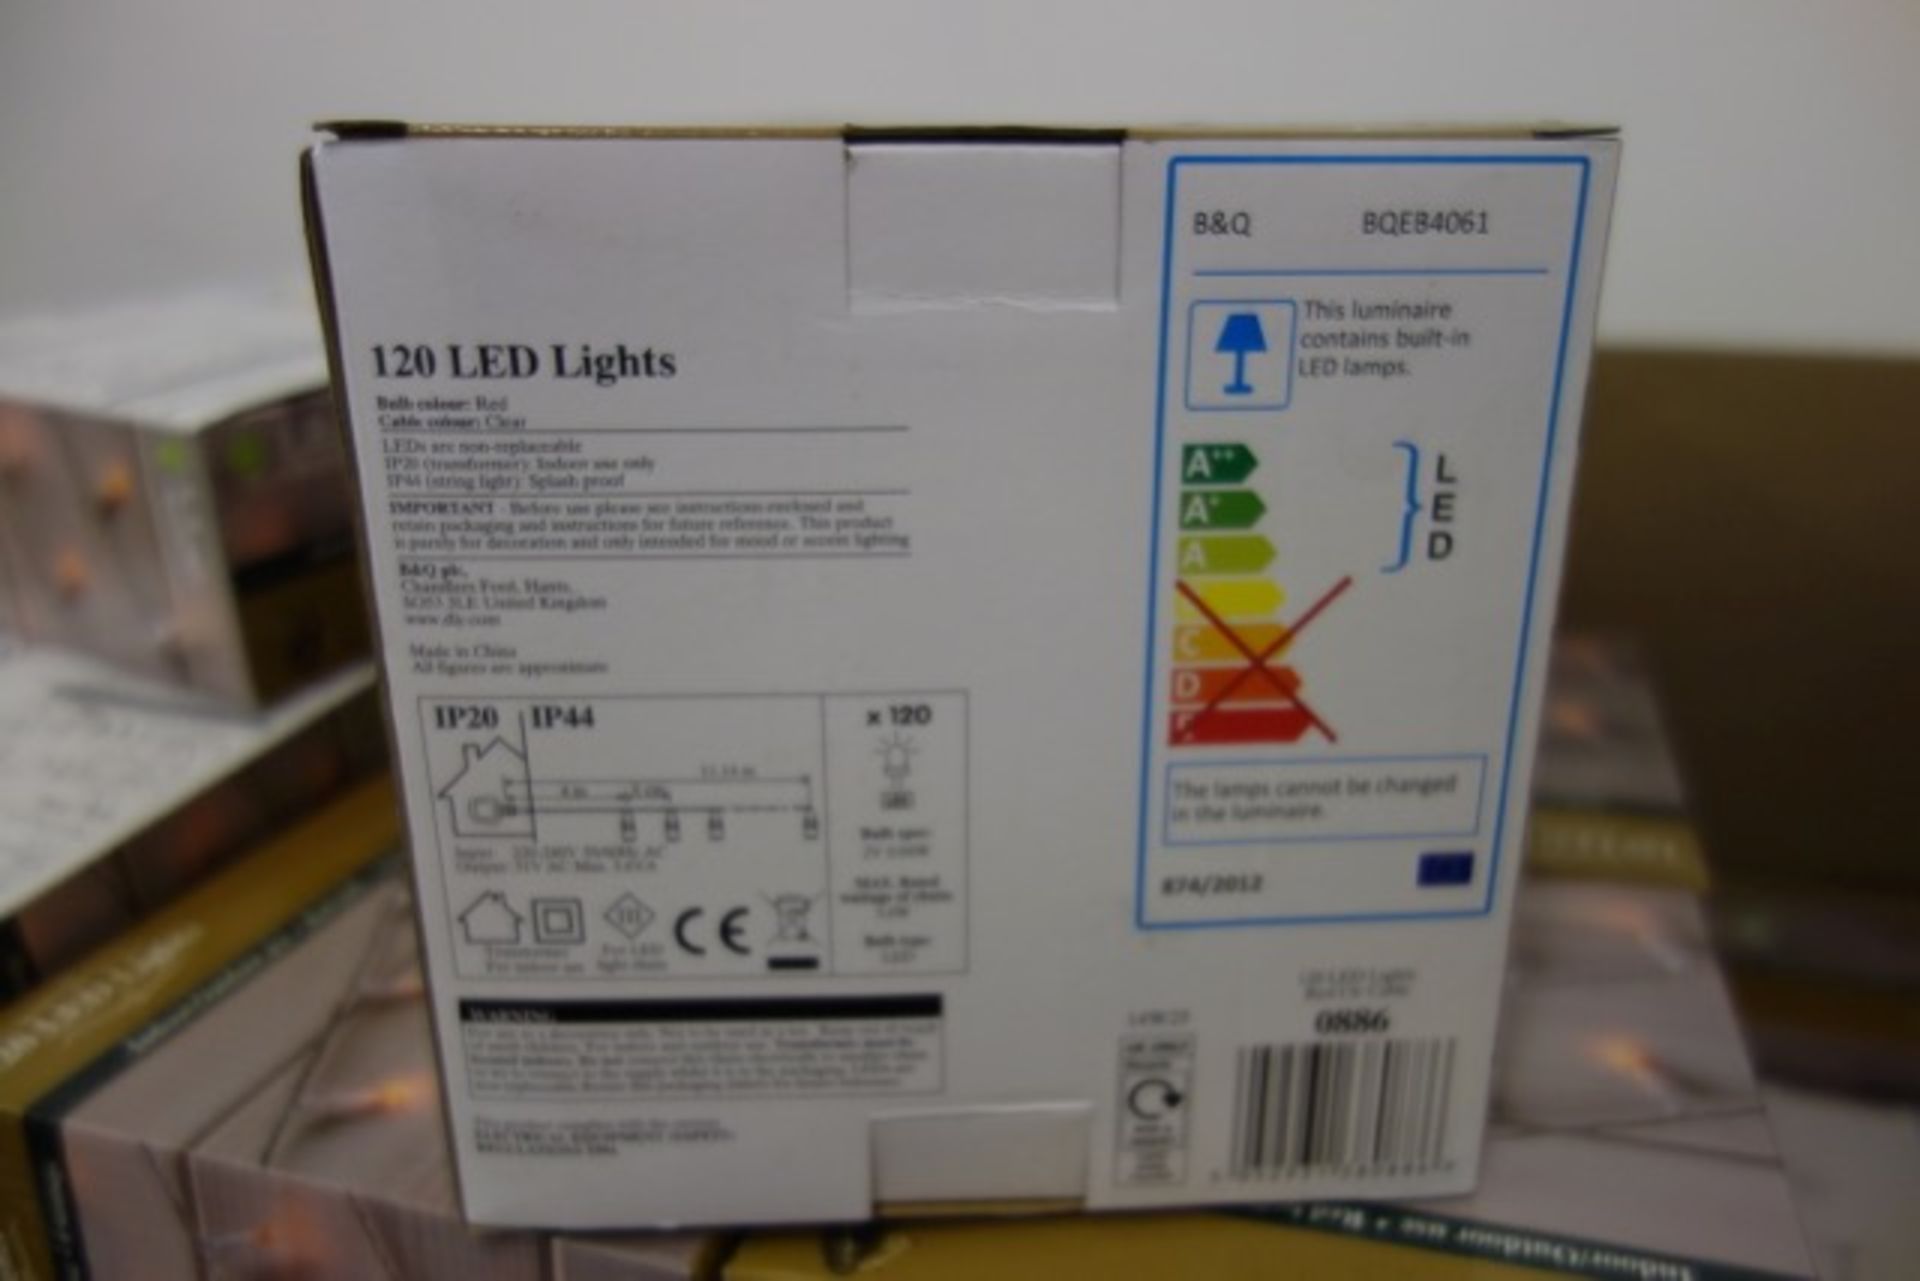 12 x 120 LED Lights - Indoor/Outdoor Use. Clear Cable. 8 Settings. Brand new stock from a major UK - Image 2 of 2